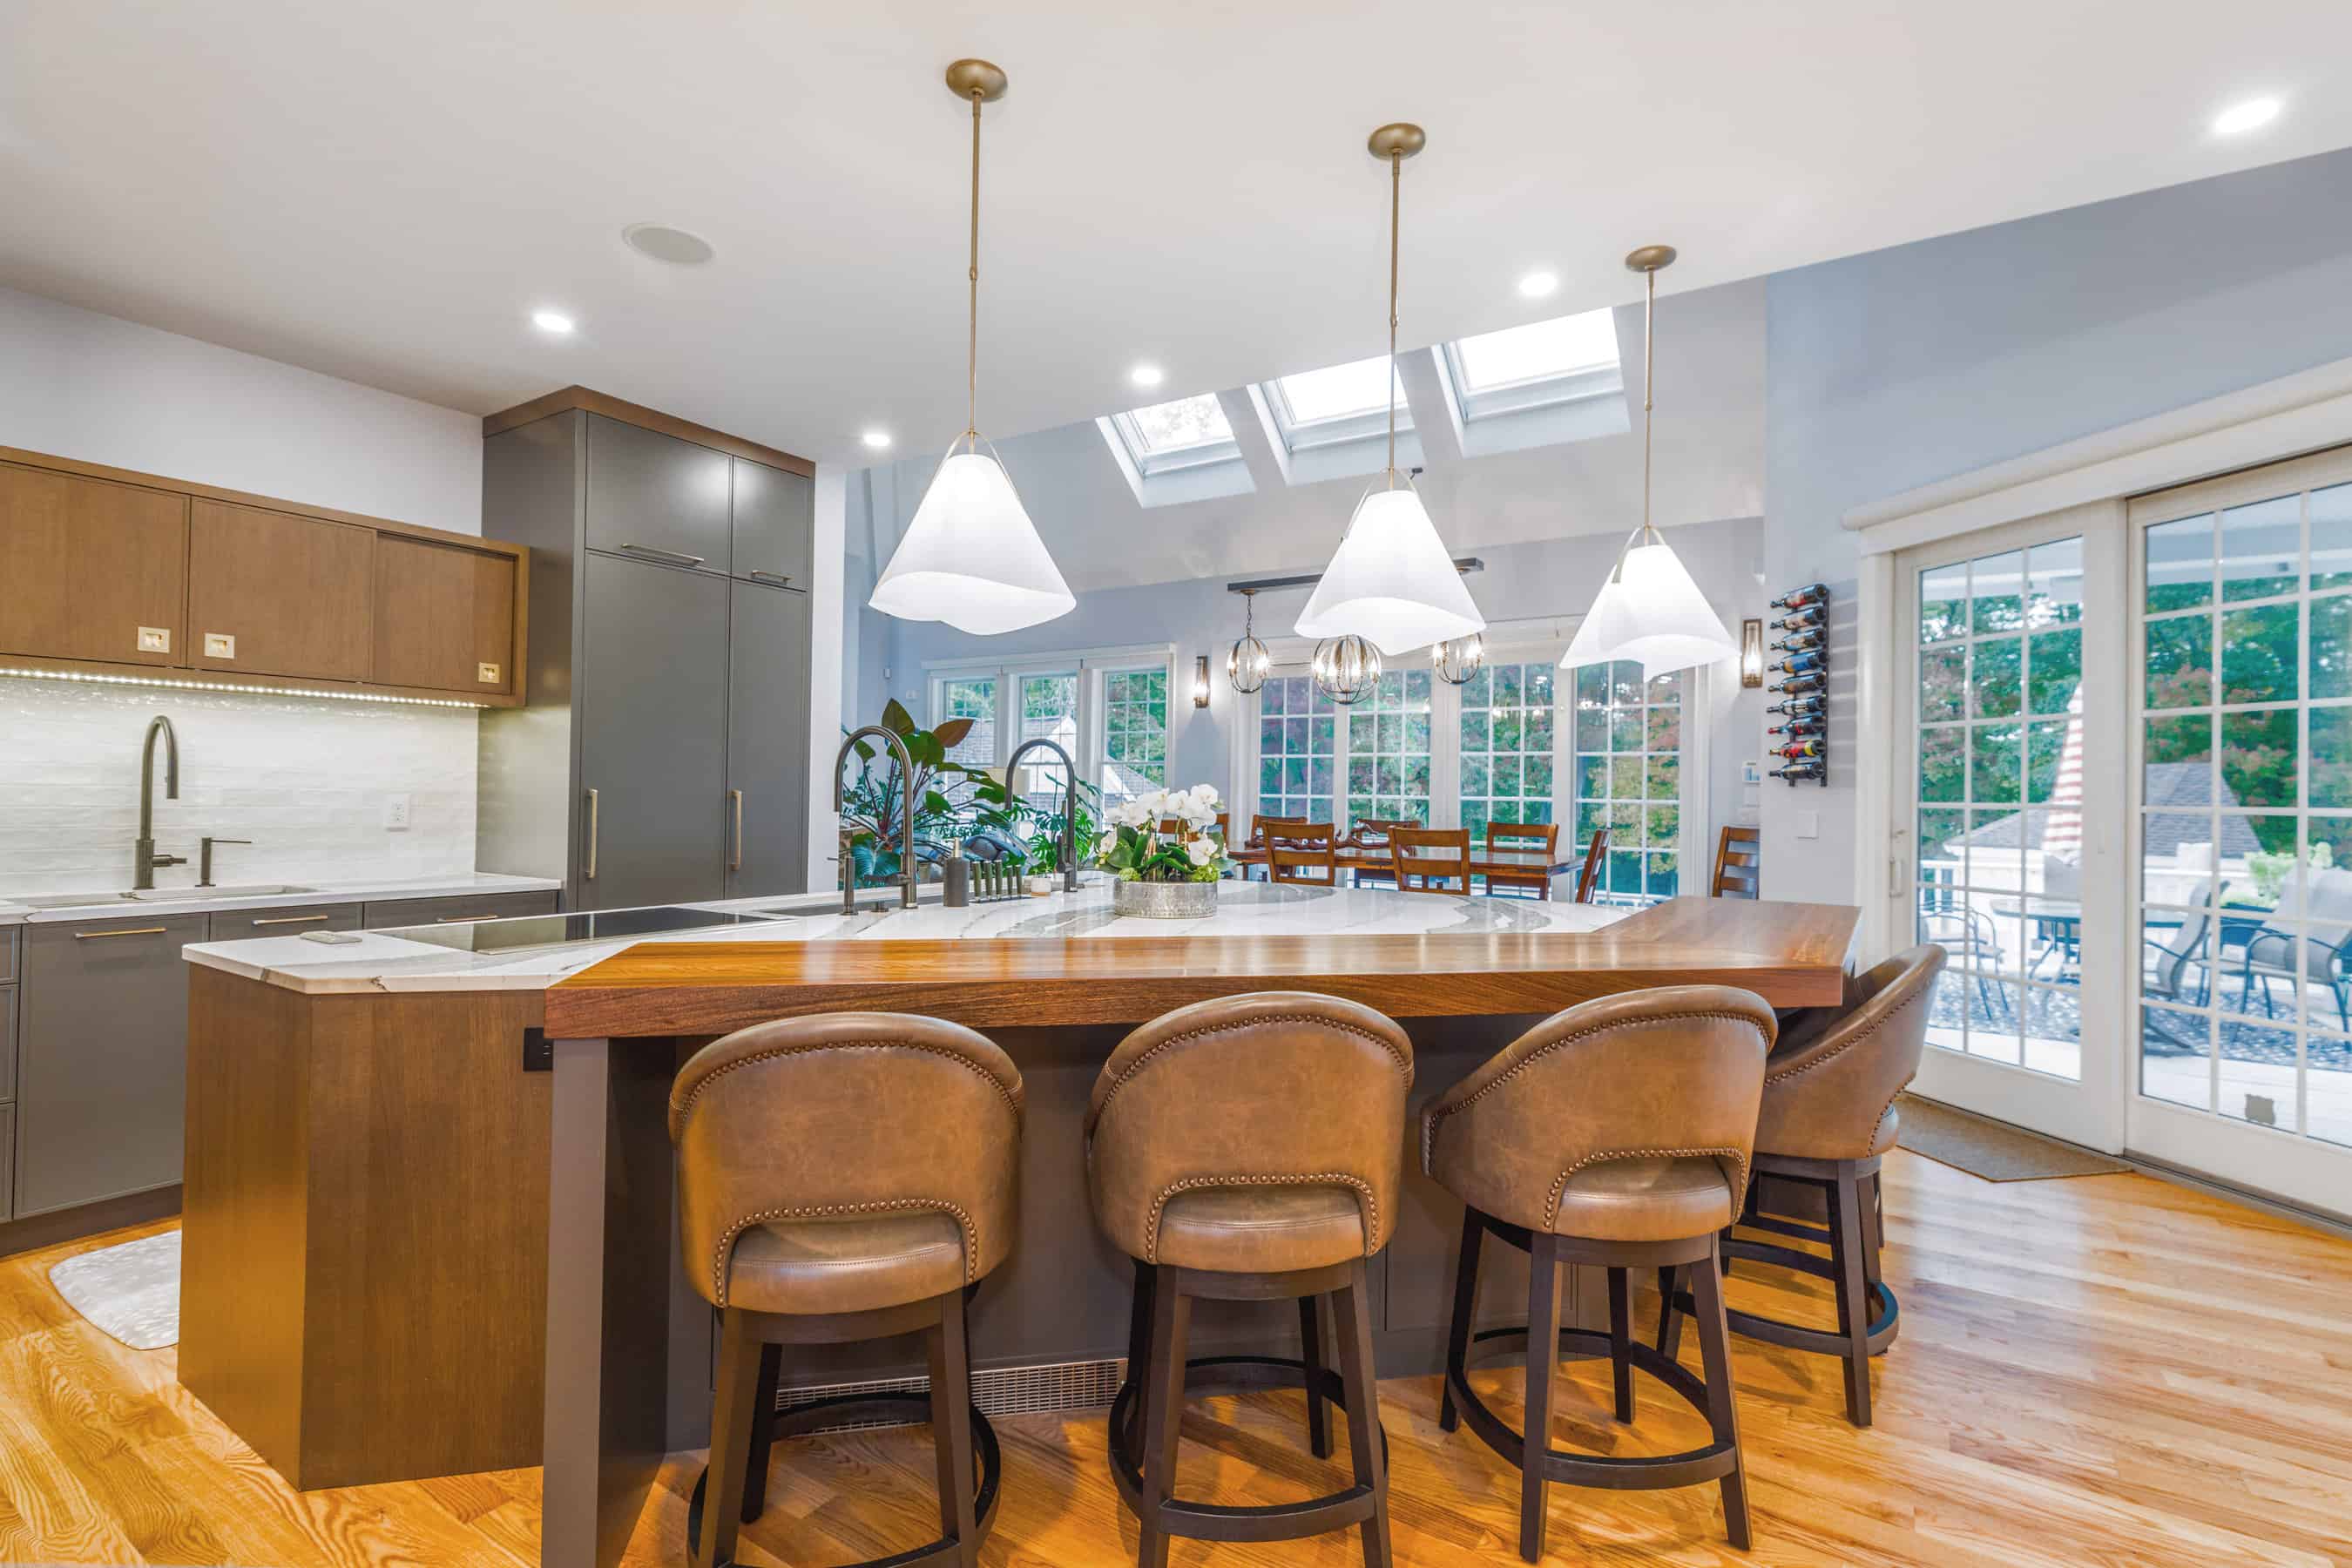 A modern style kitchen featuring slab-style cabinetry and an oversized island with plenty of seating and prep space. 